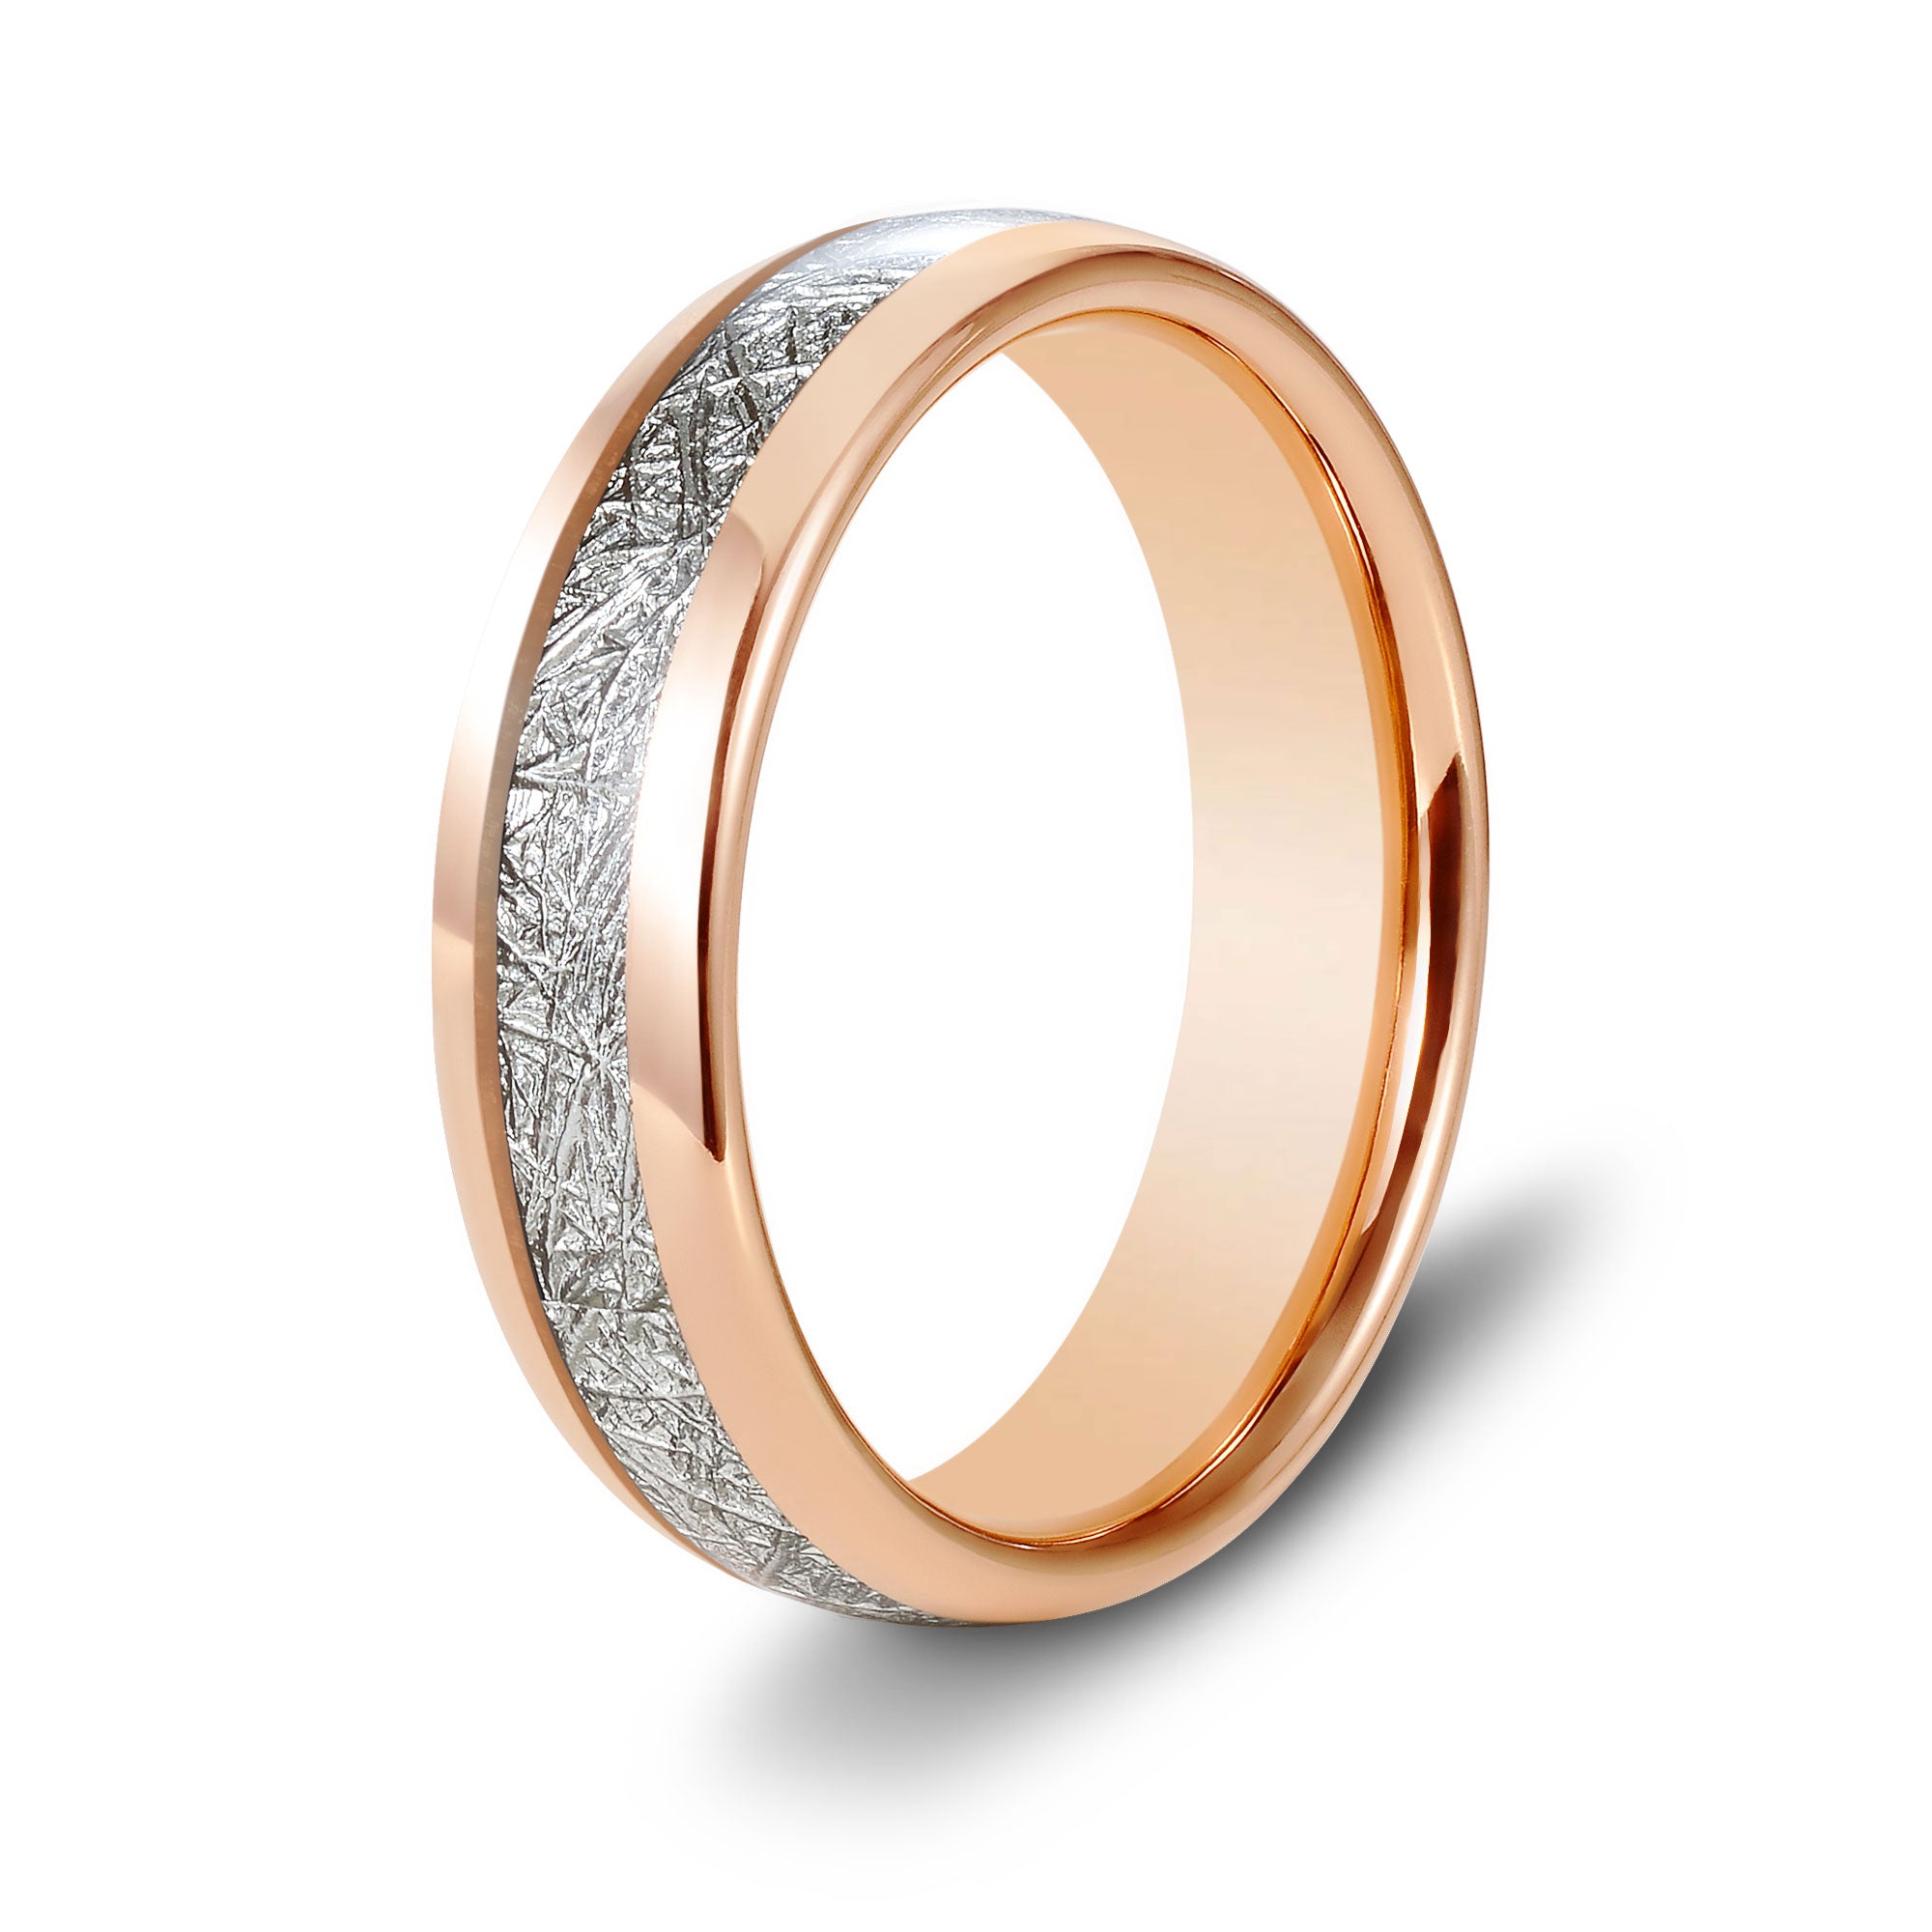 The Companion - Rose Gold 6mm Meteorite Tungsten Ring